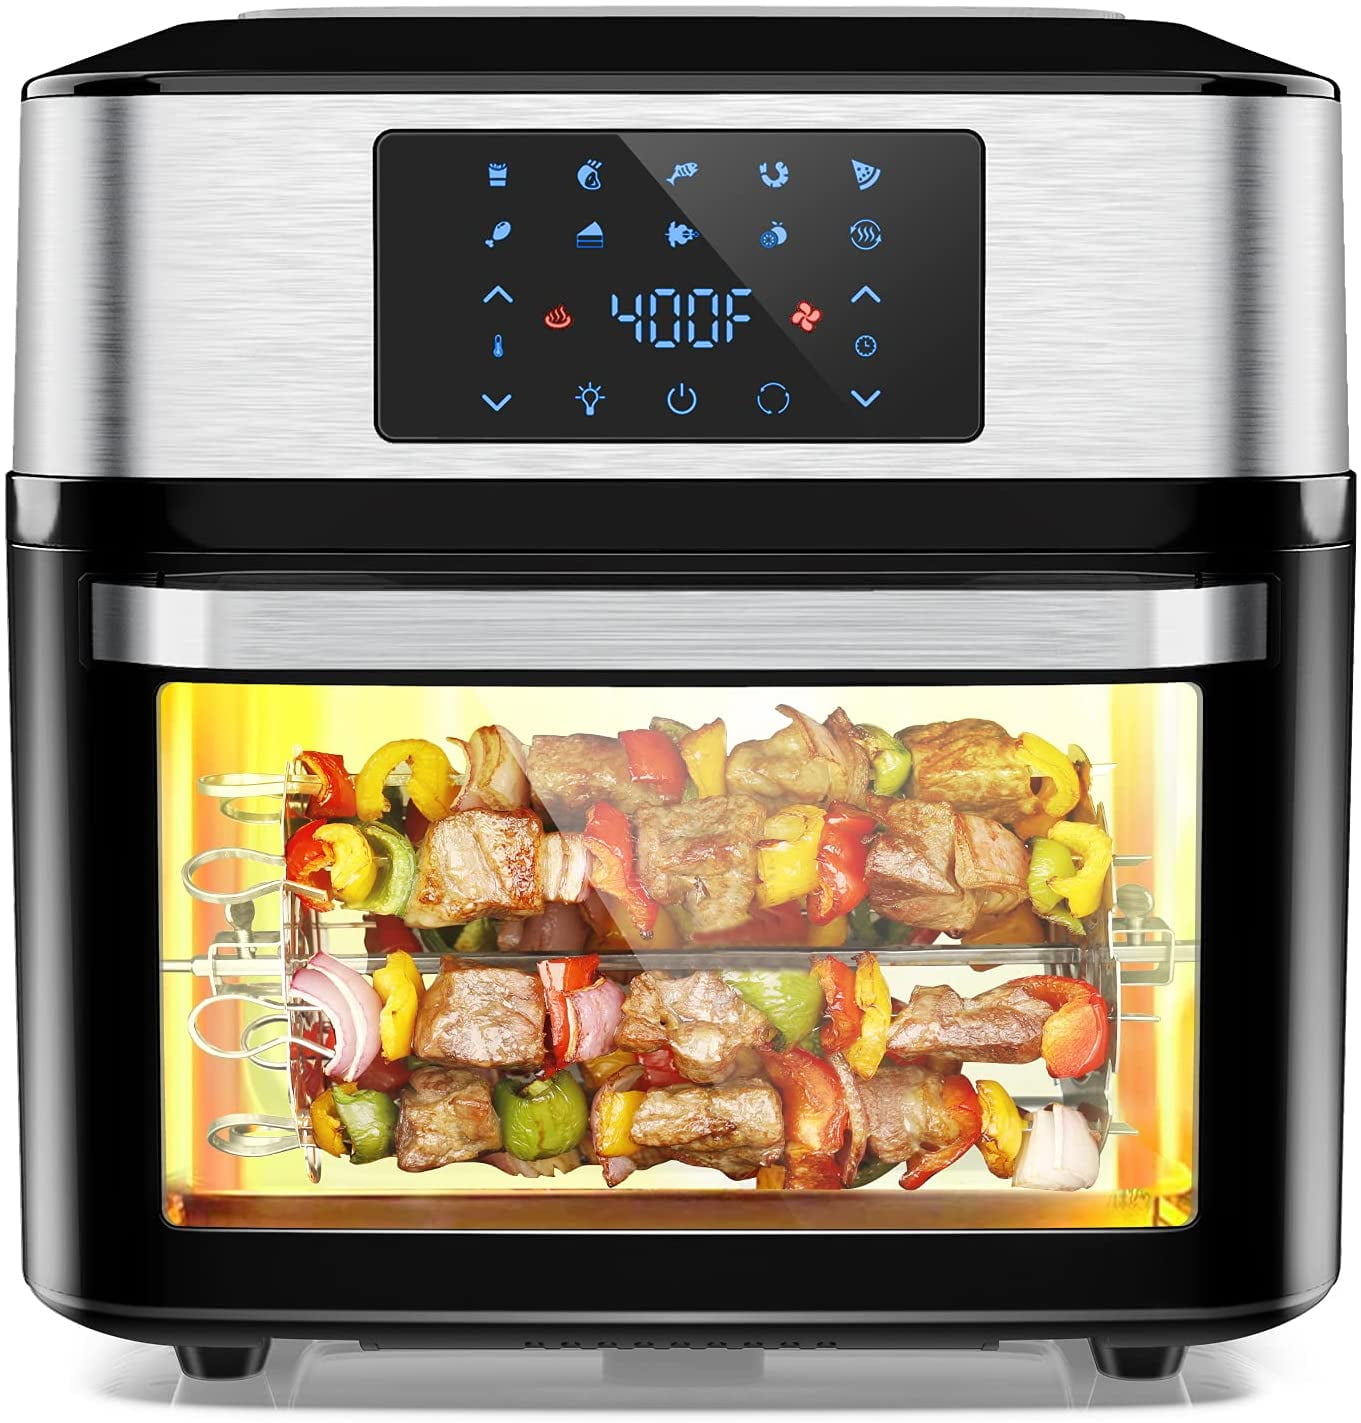 10-in-1 Air Fryer Oven, 20 Quart Airfryer Toaster Oven , 1800W